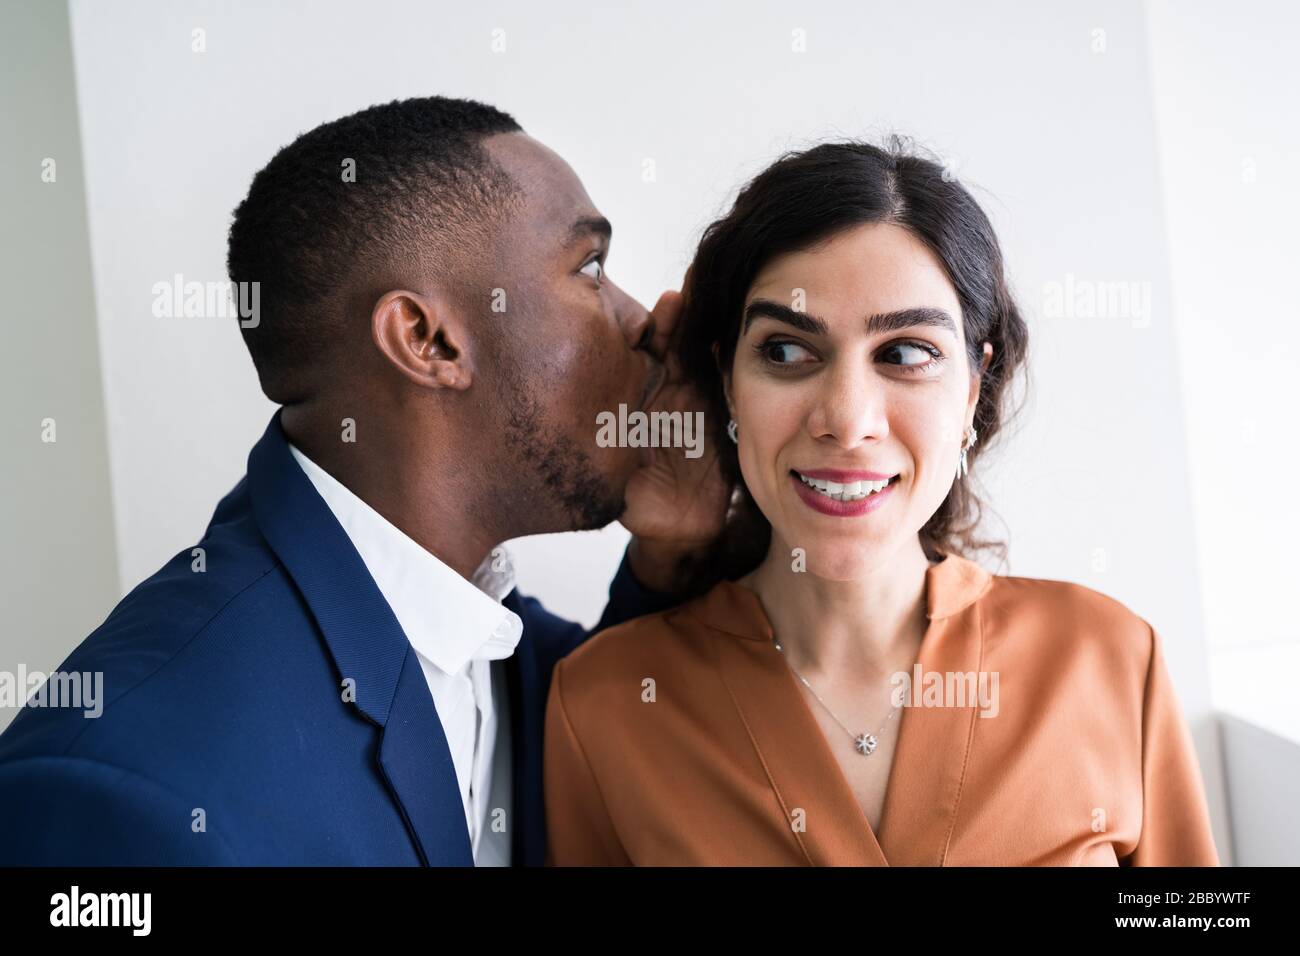 Close-up Of Businessman Whispering Into Female Partner's Ear Stock Photo